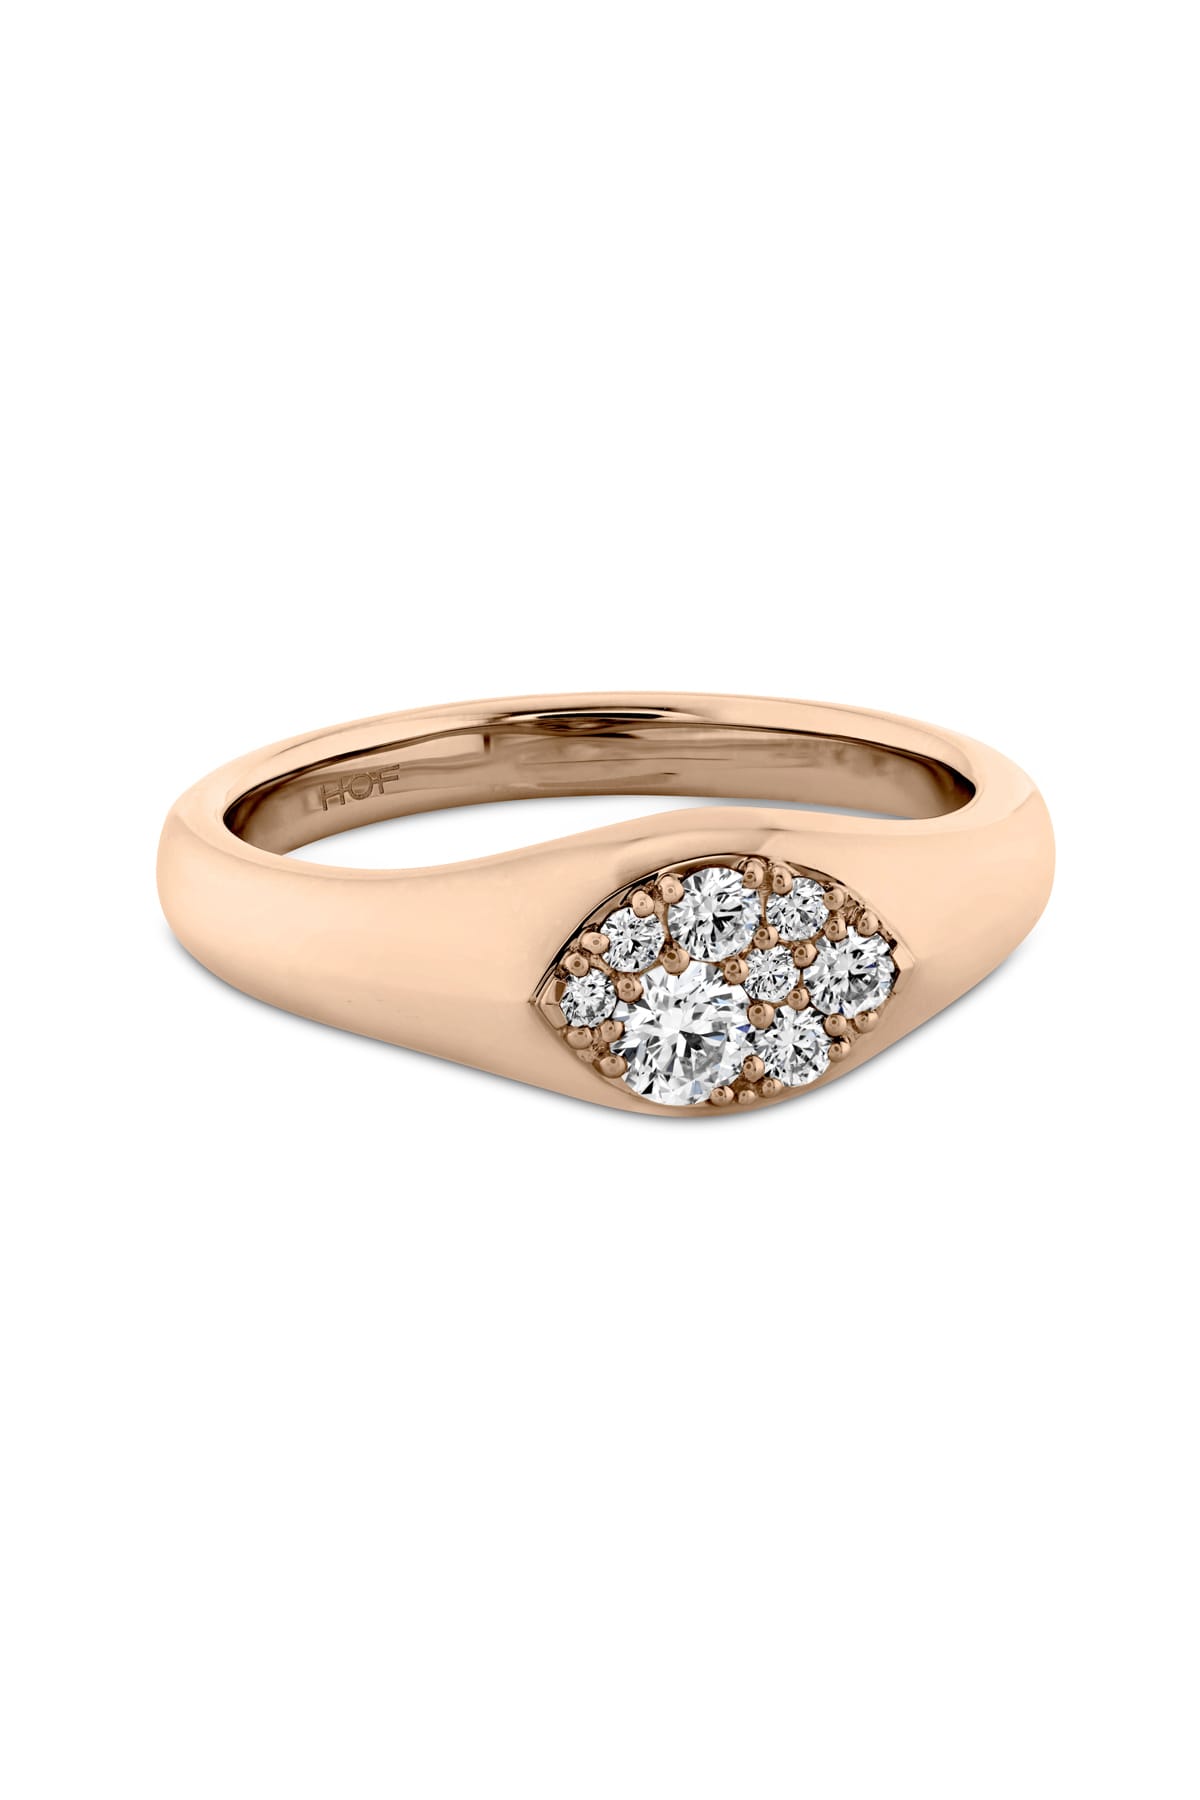 Tessa Navette Signet Ring From Hearts On Fire available at LeGassick Diamonds and Jewellery Gold Coast, Australia.